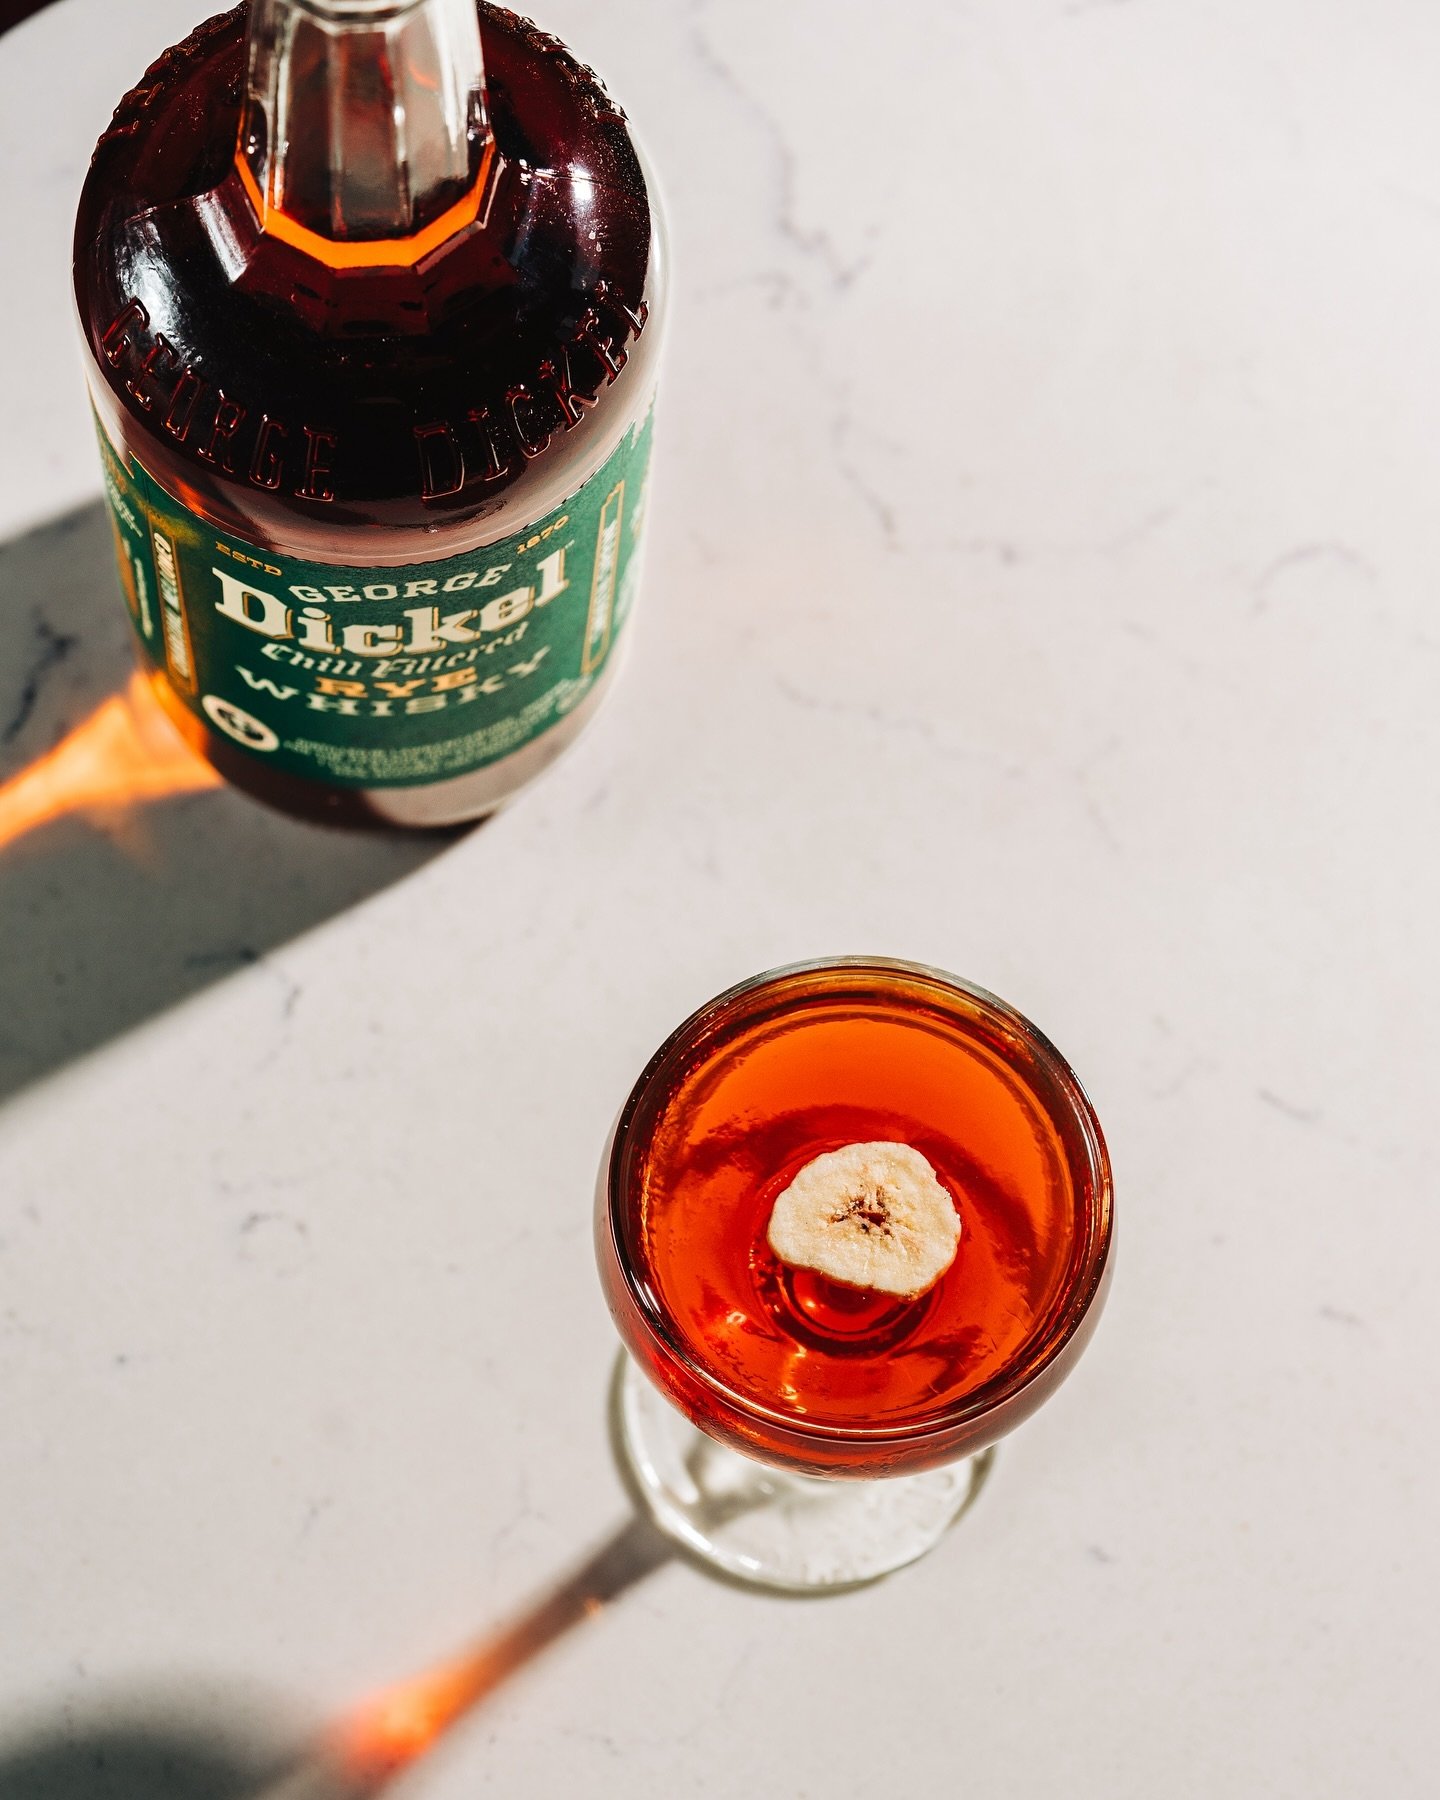 We love putting tea in cocktails!
The Black Lodge, from our 5 year anniversary menu, is a take on a classic Manhattan. 
Made with @georgedickel Rye infused with @augustuncommon Black Lodge Tea, stirred with sweet vermouth and garnished with a banana 